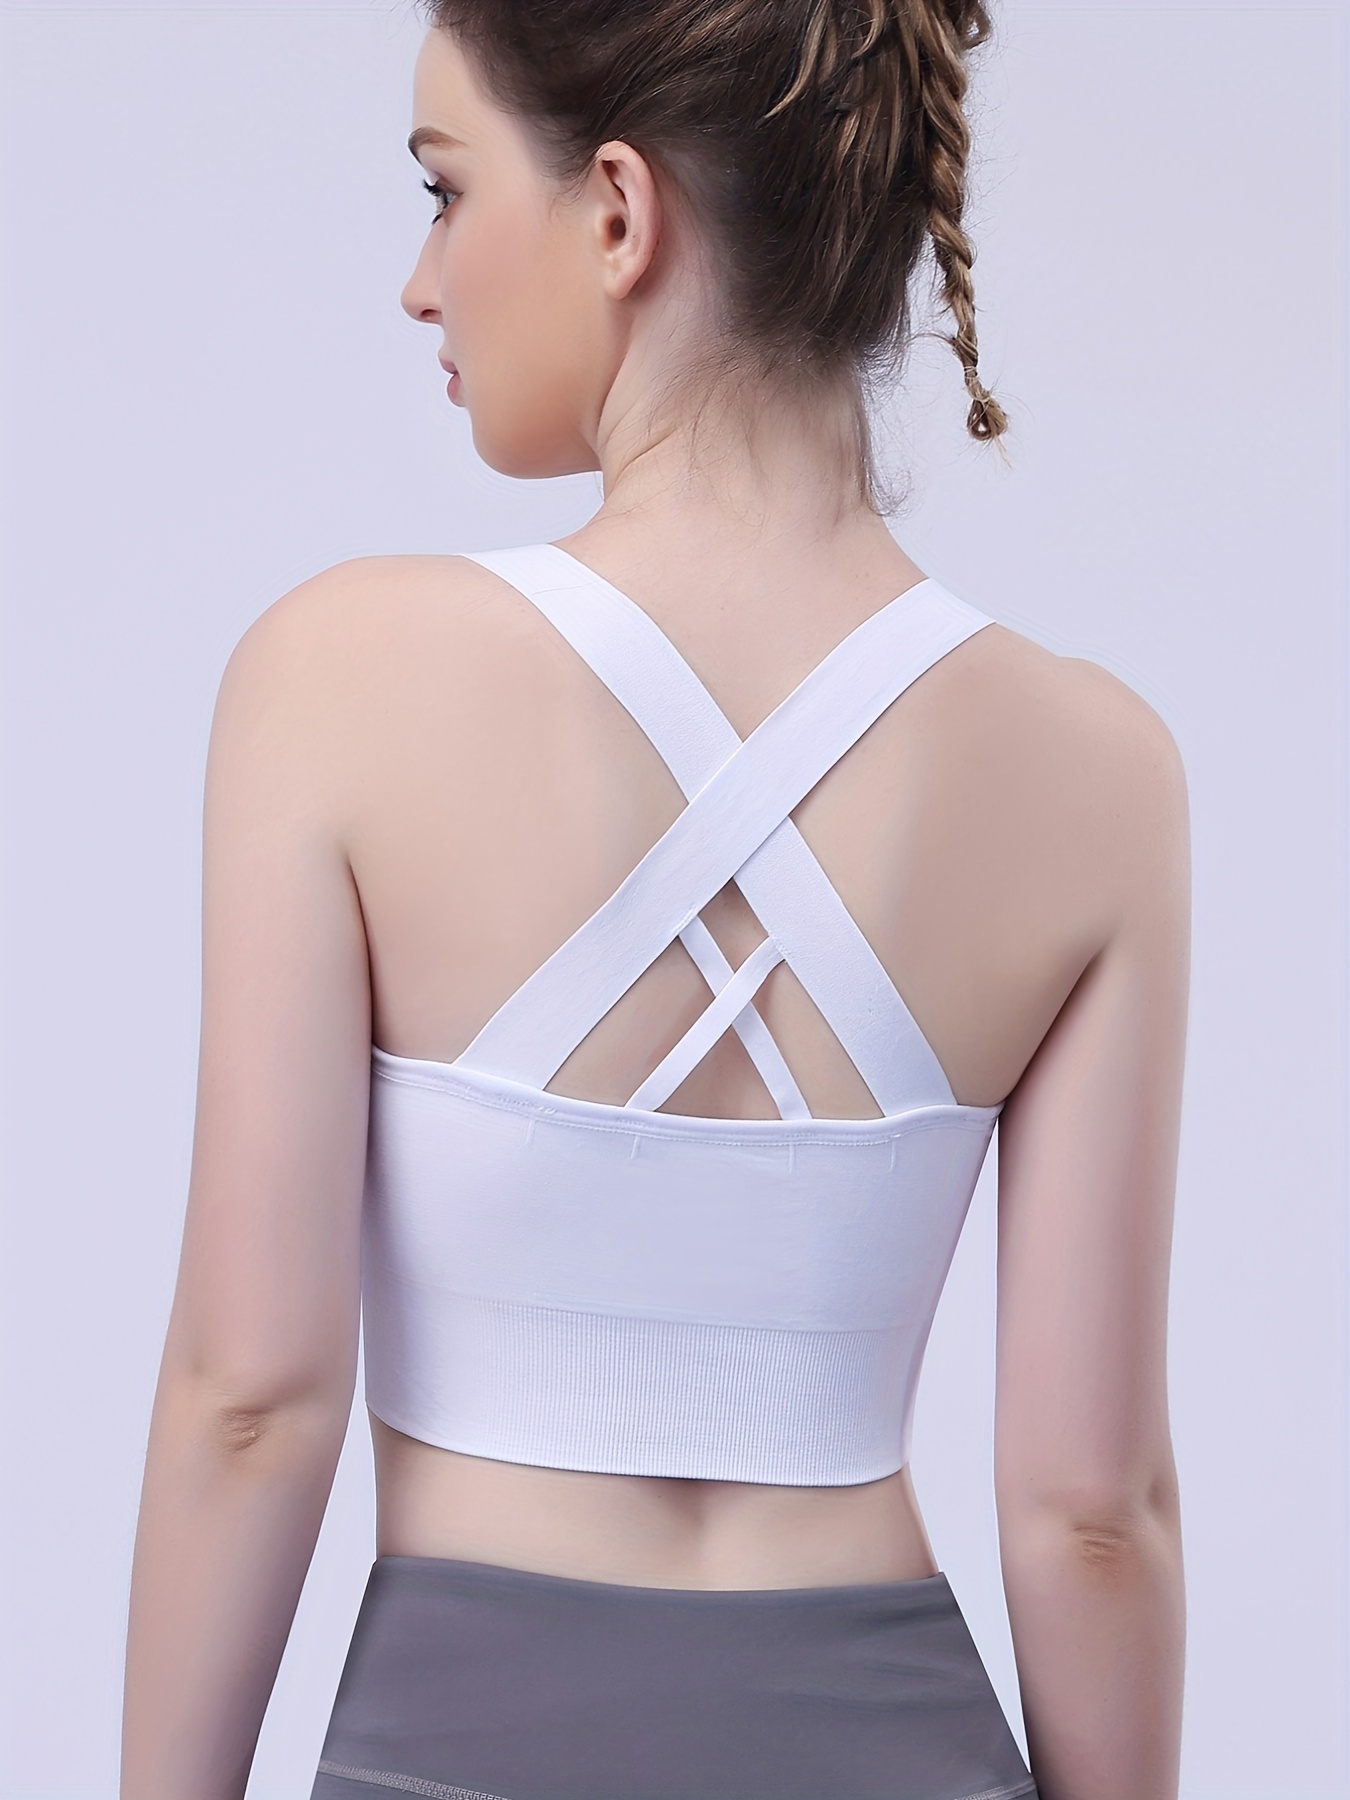 Sports Bras For Women Gym Running, Unique Cross Back Strappy